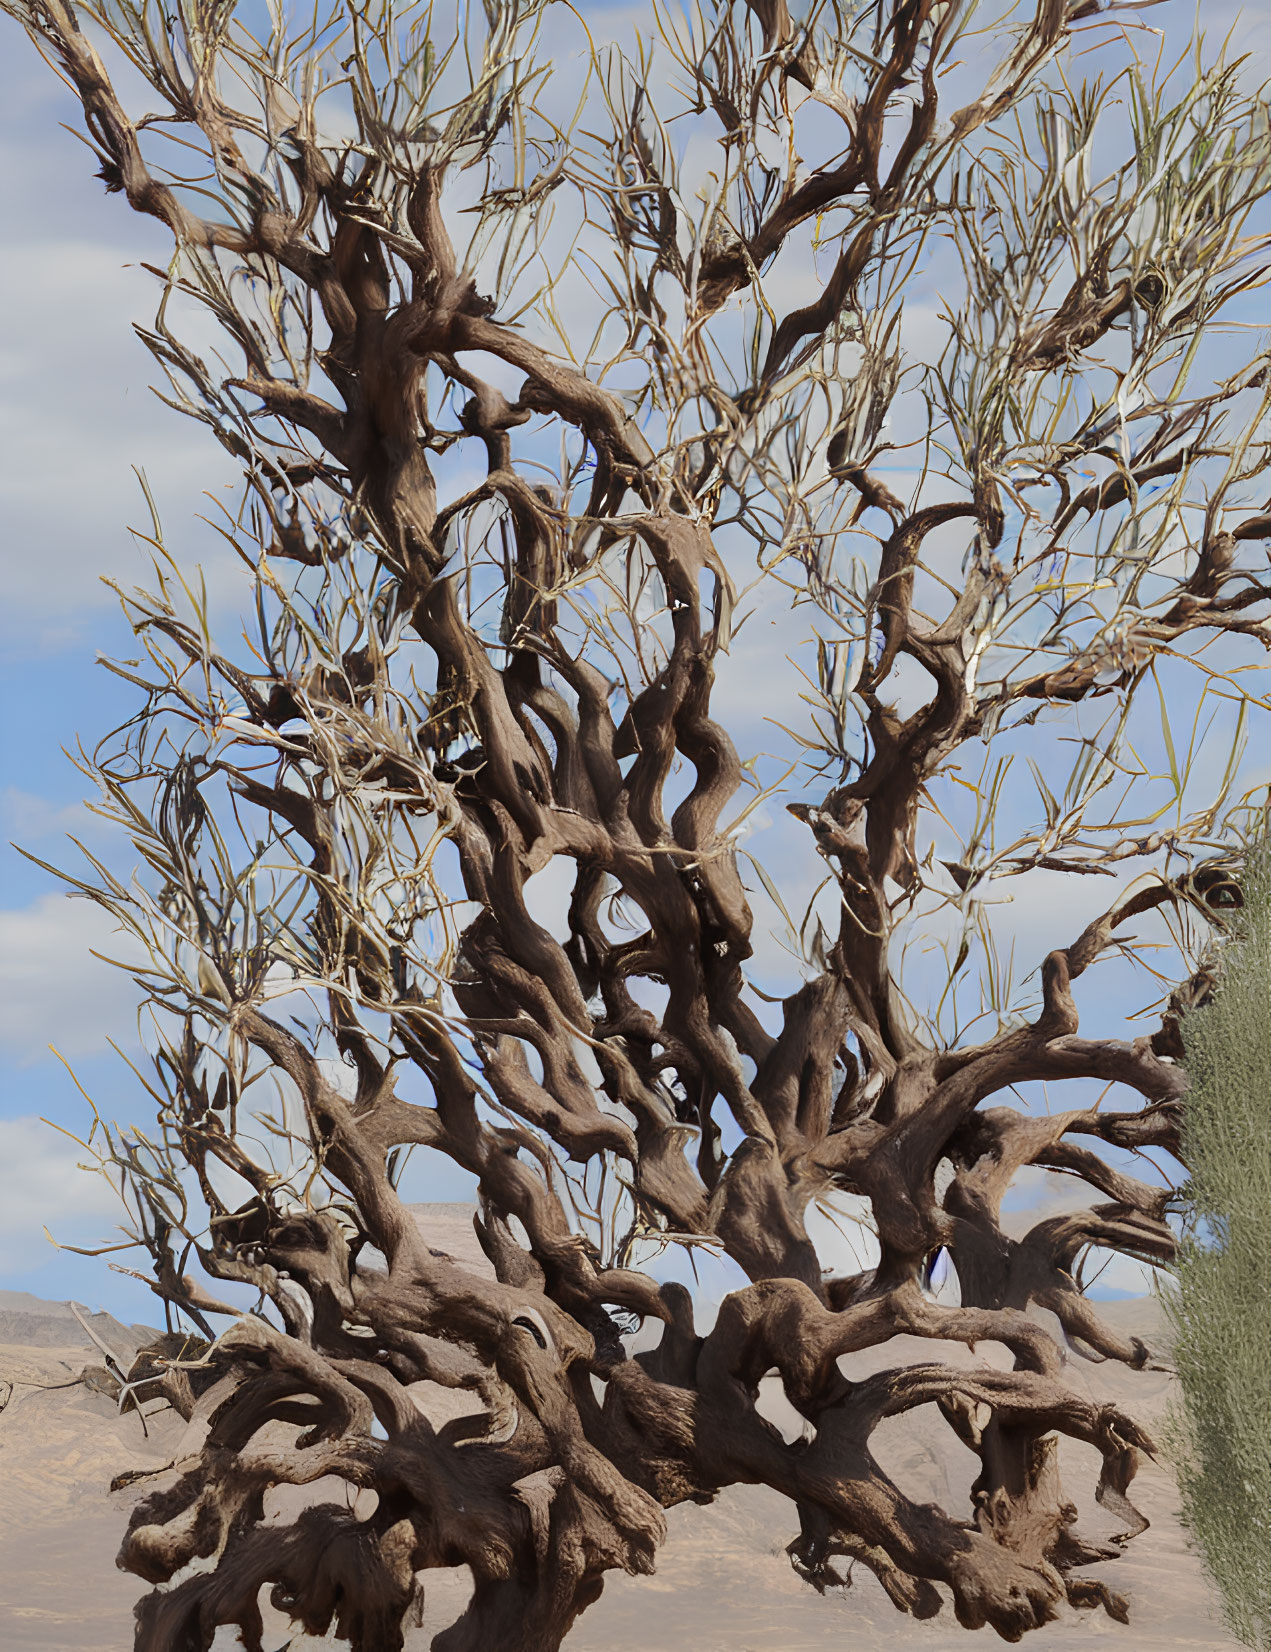 Twisted gnarled tree with dense branches in desert landscape